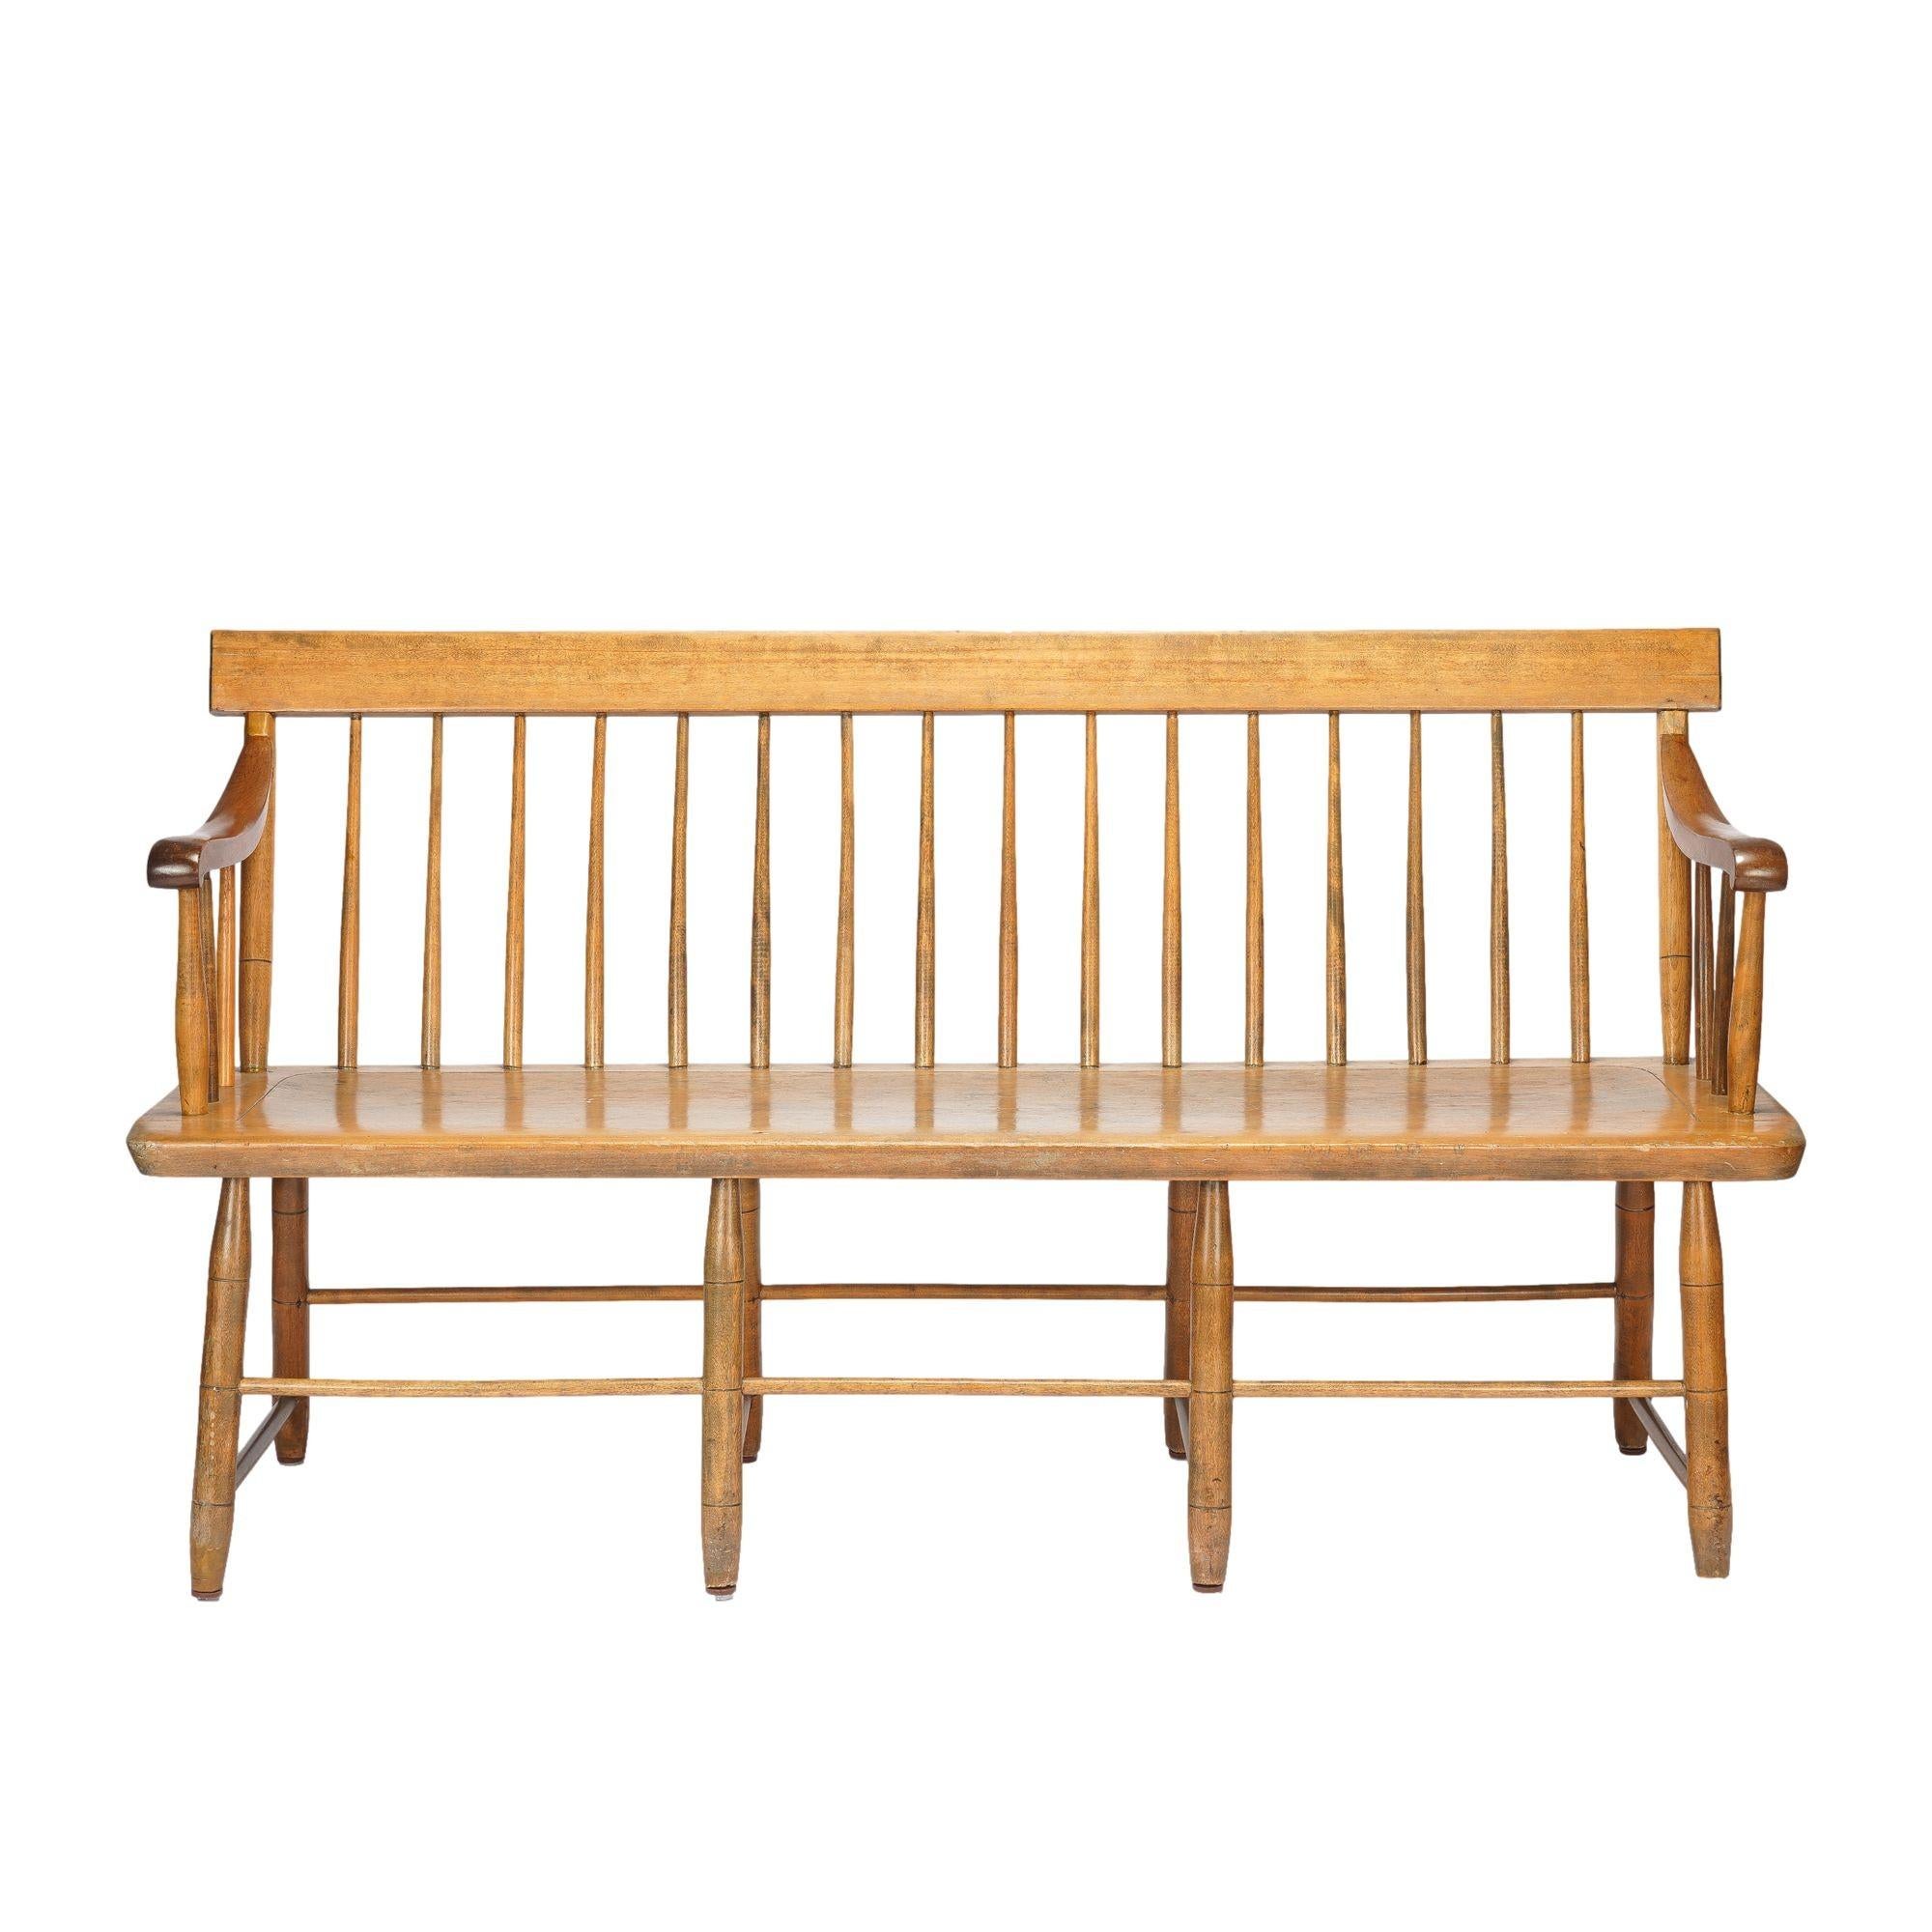 Windsor bench with carved mahogany arms and mixed woods. The bench has a birch crest rail supported by turned spindles on a single pine board shaped seat supported by bamboo turned legs with box stretchers. The arms are scroll carved mahogany and